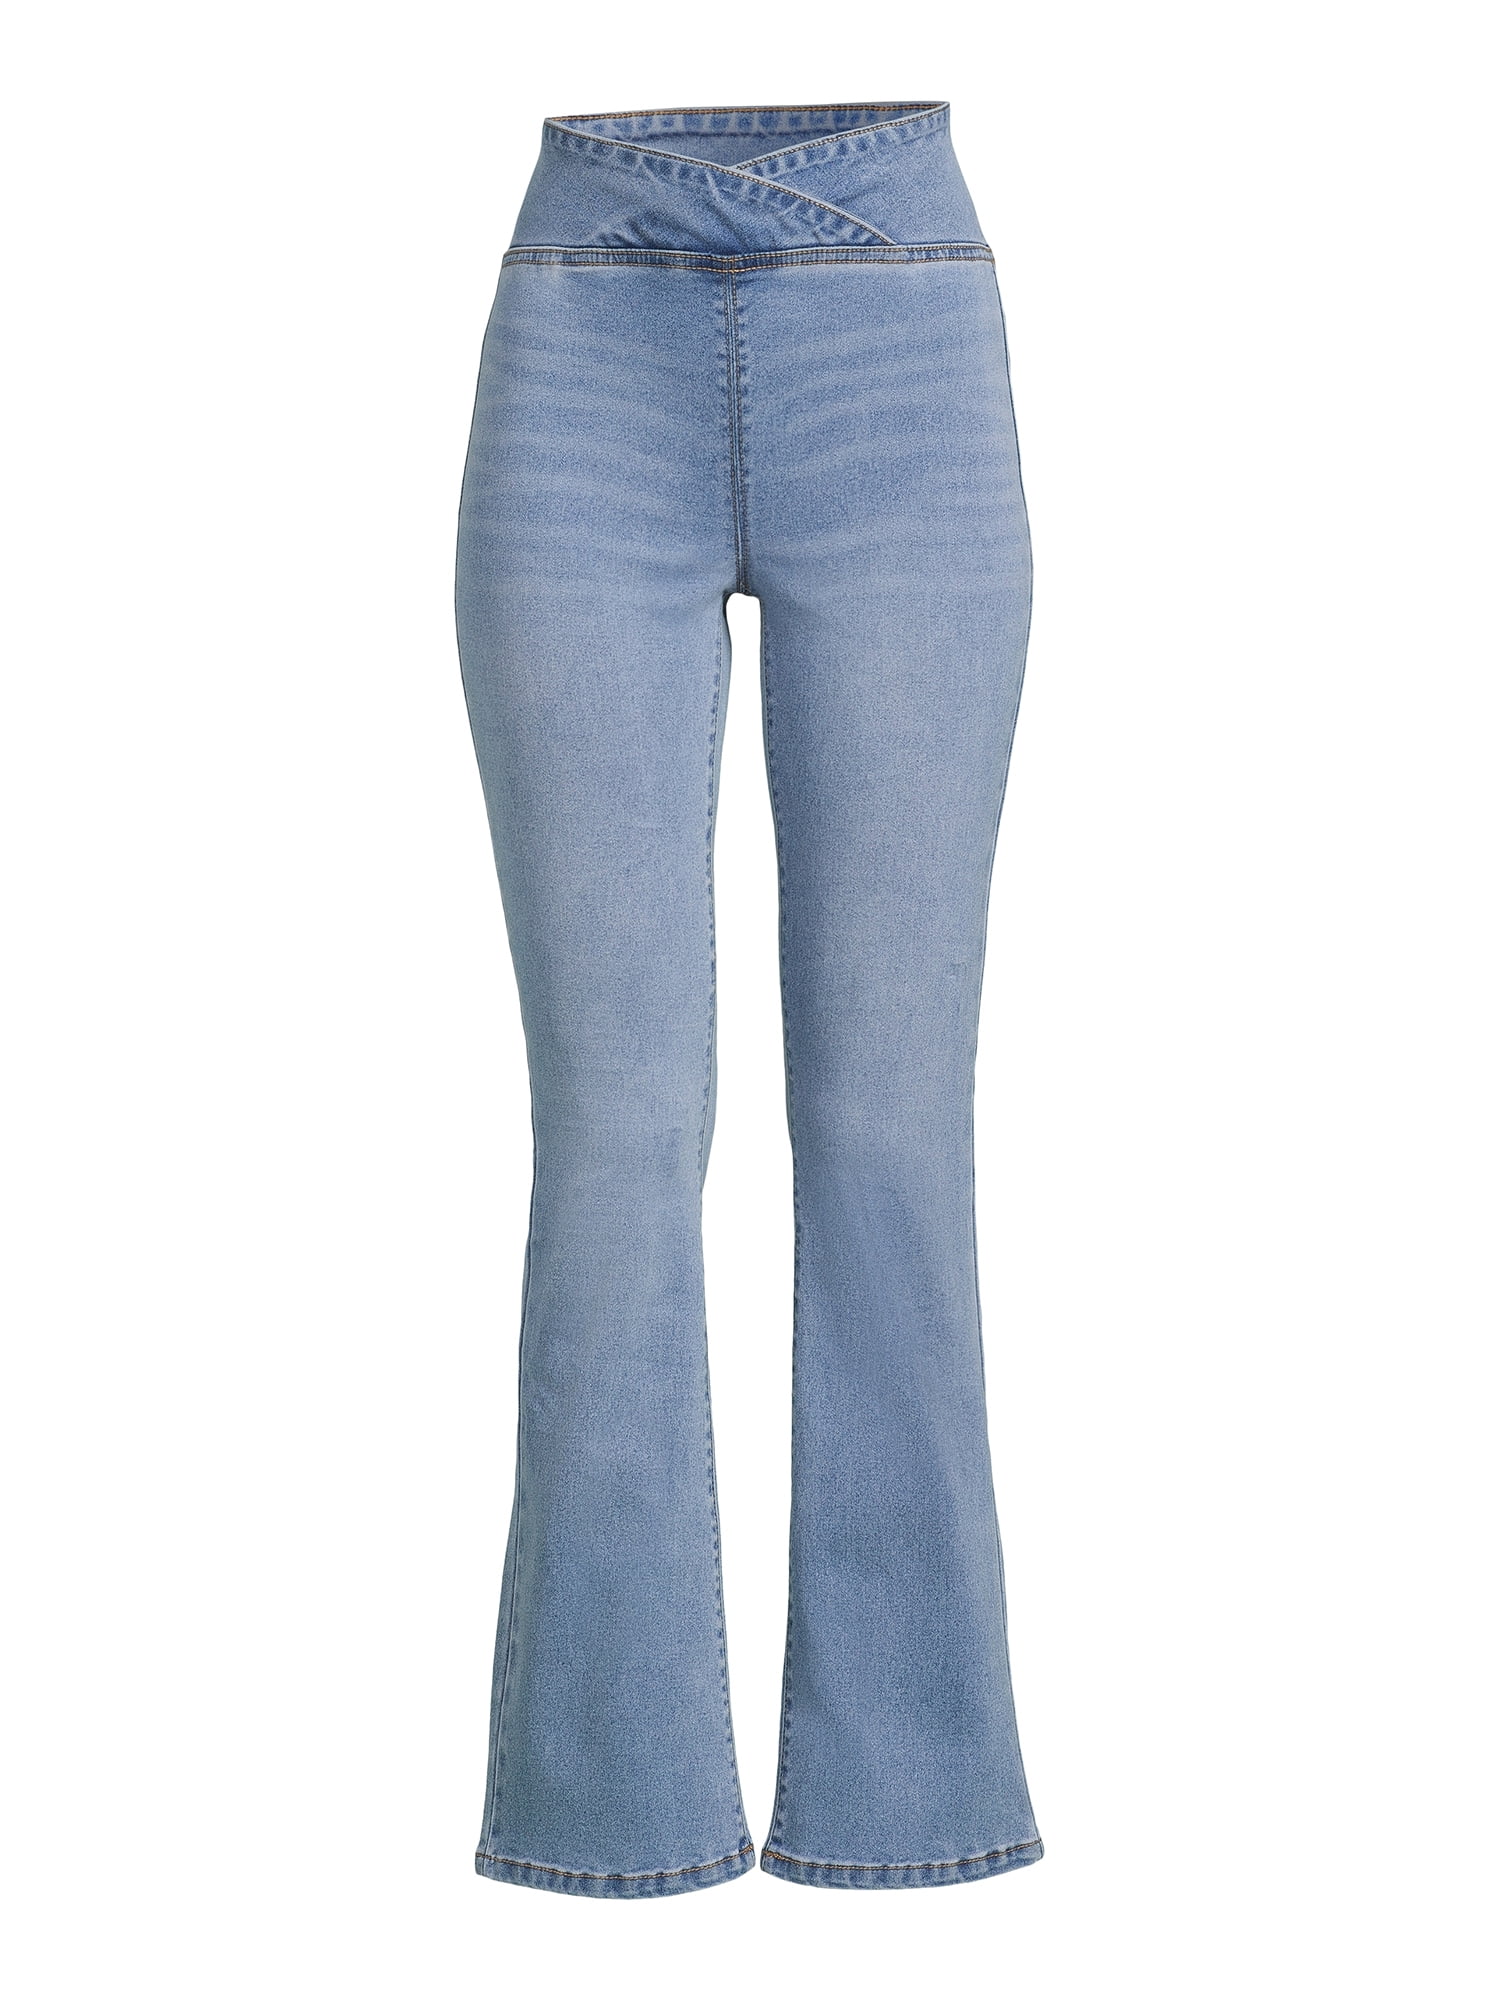 New!No Boundaries Mid Rise Pull On Jeggings. Size S(3-5). Comfort And Style.